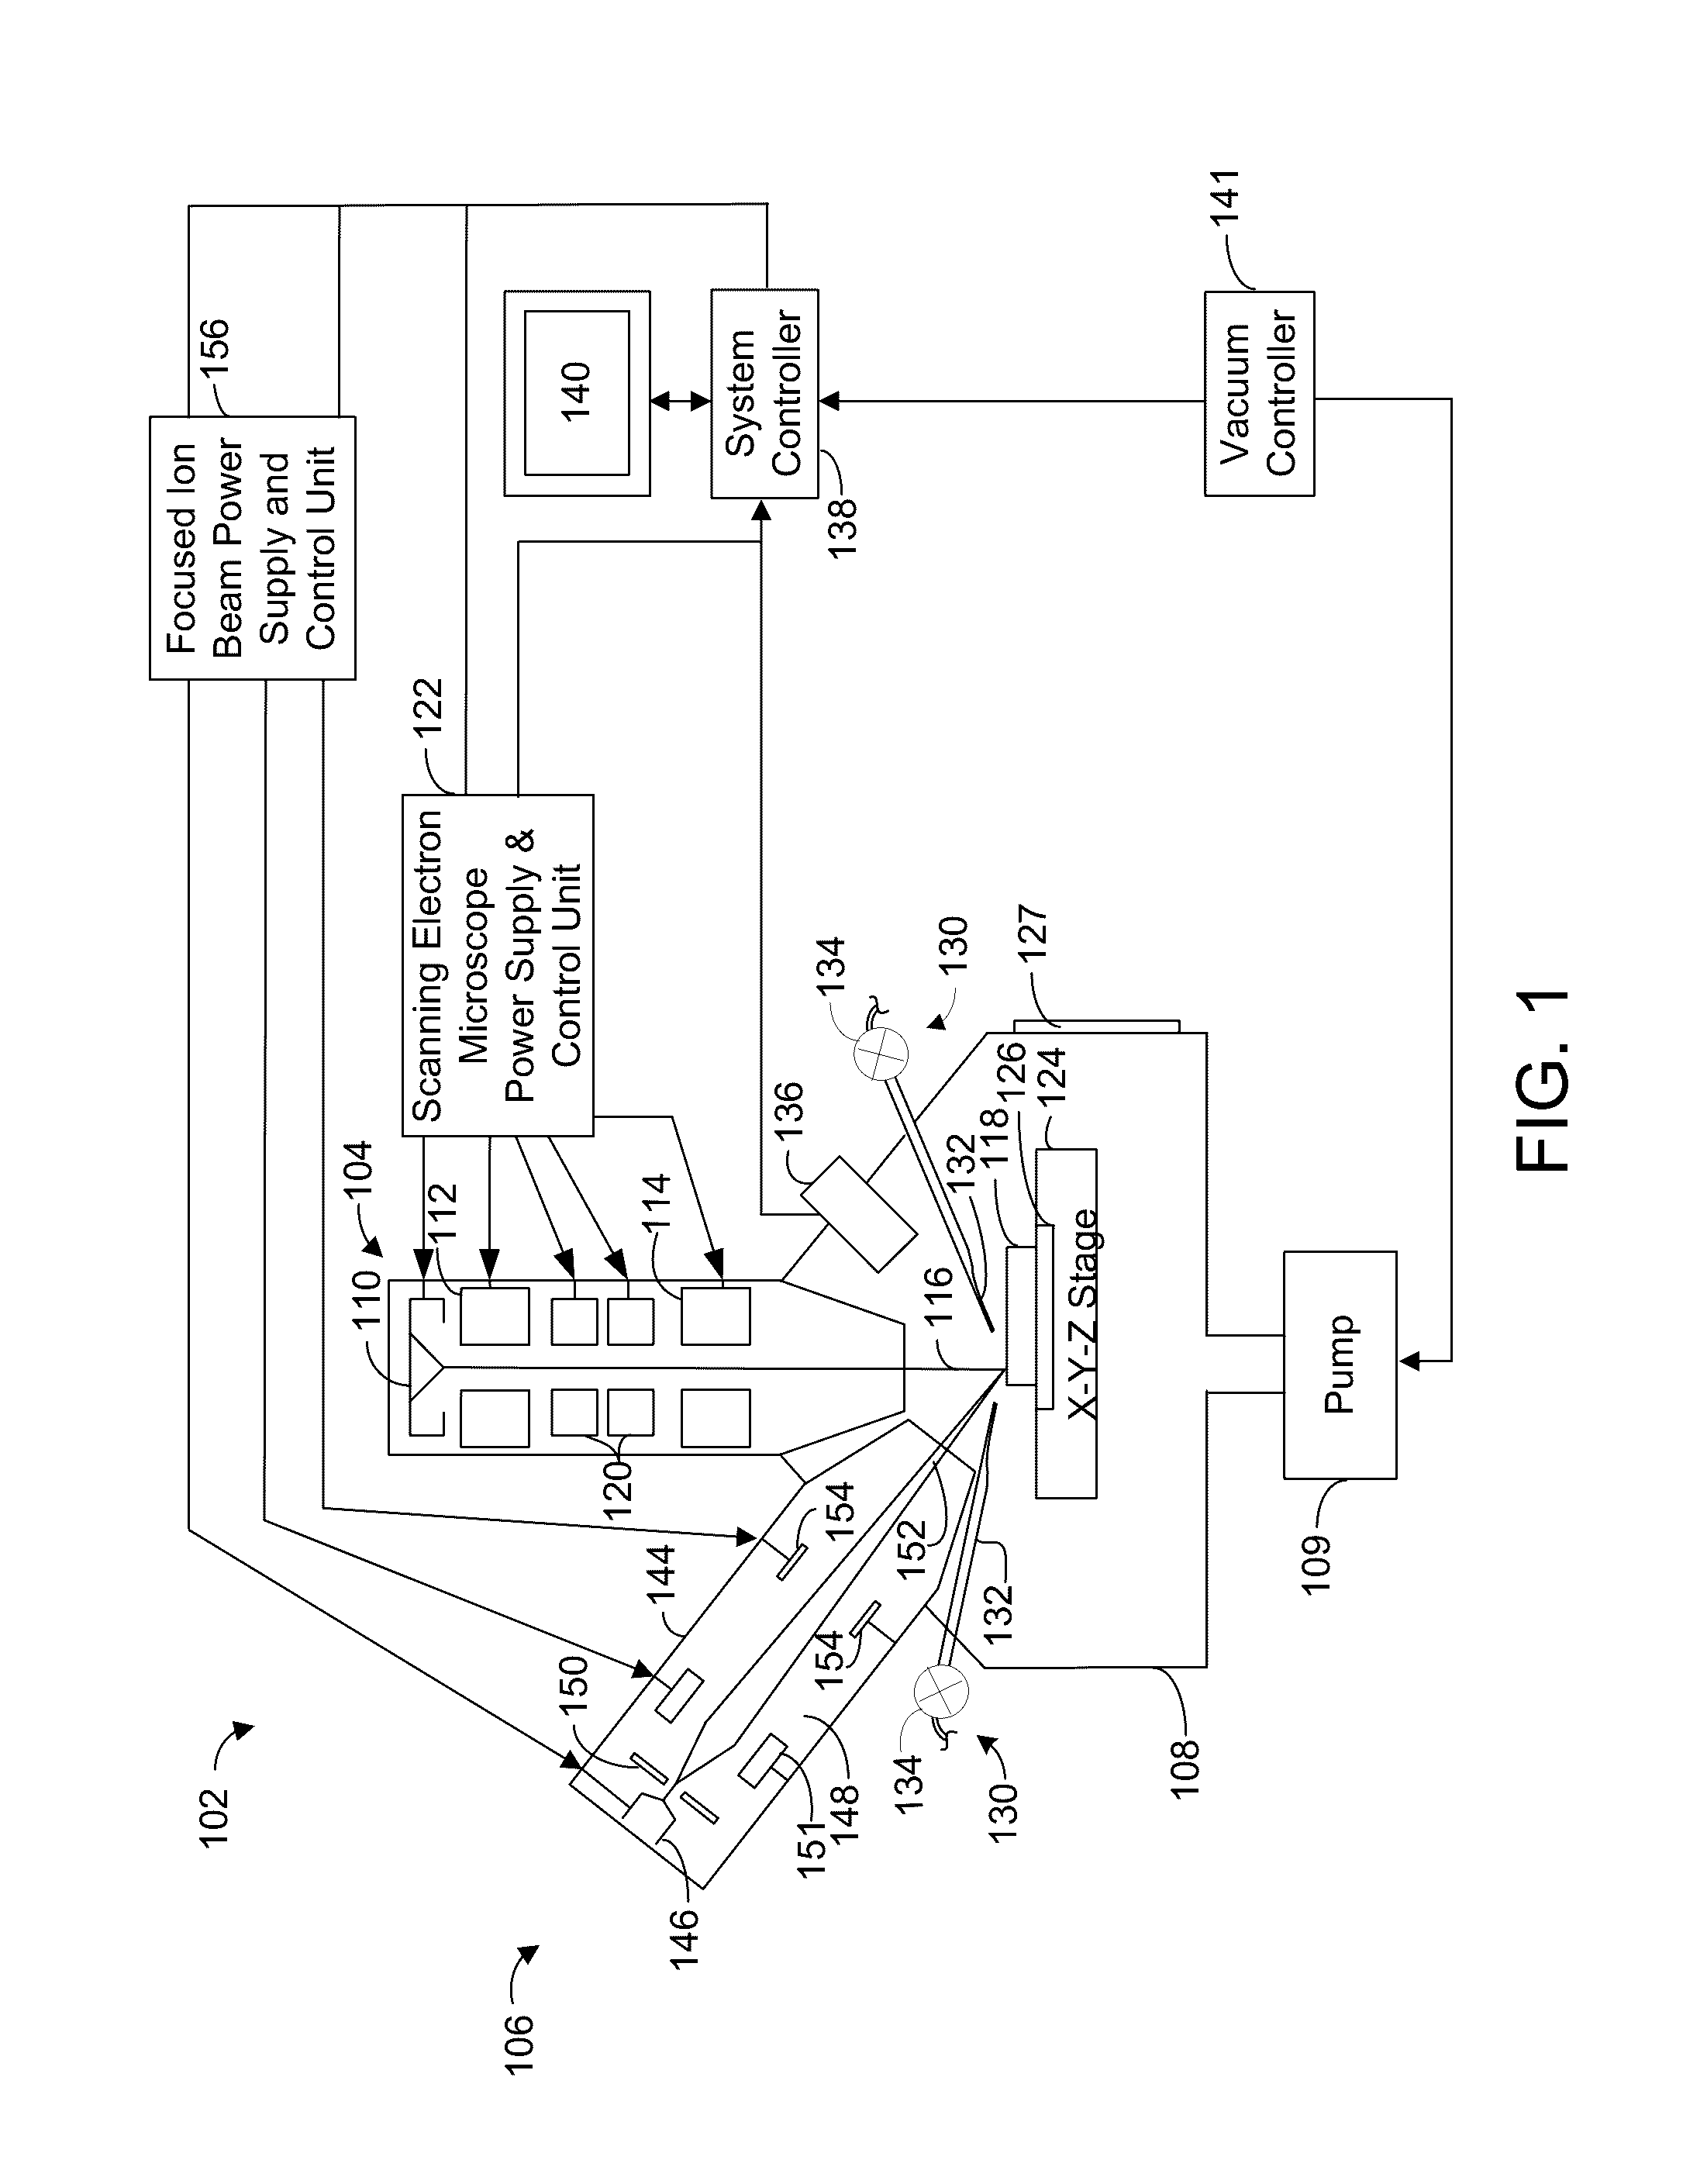 Adaptive control for charged particle beam processing